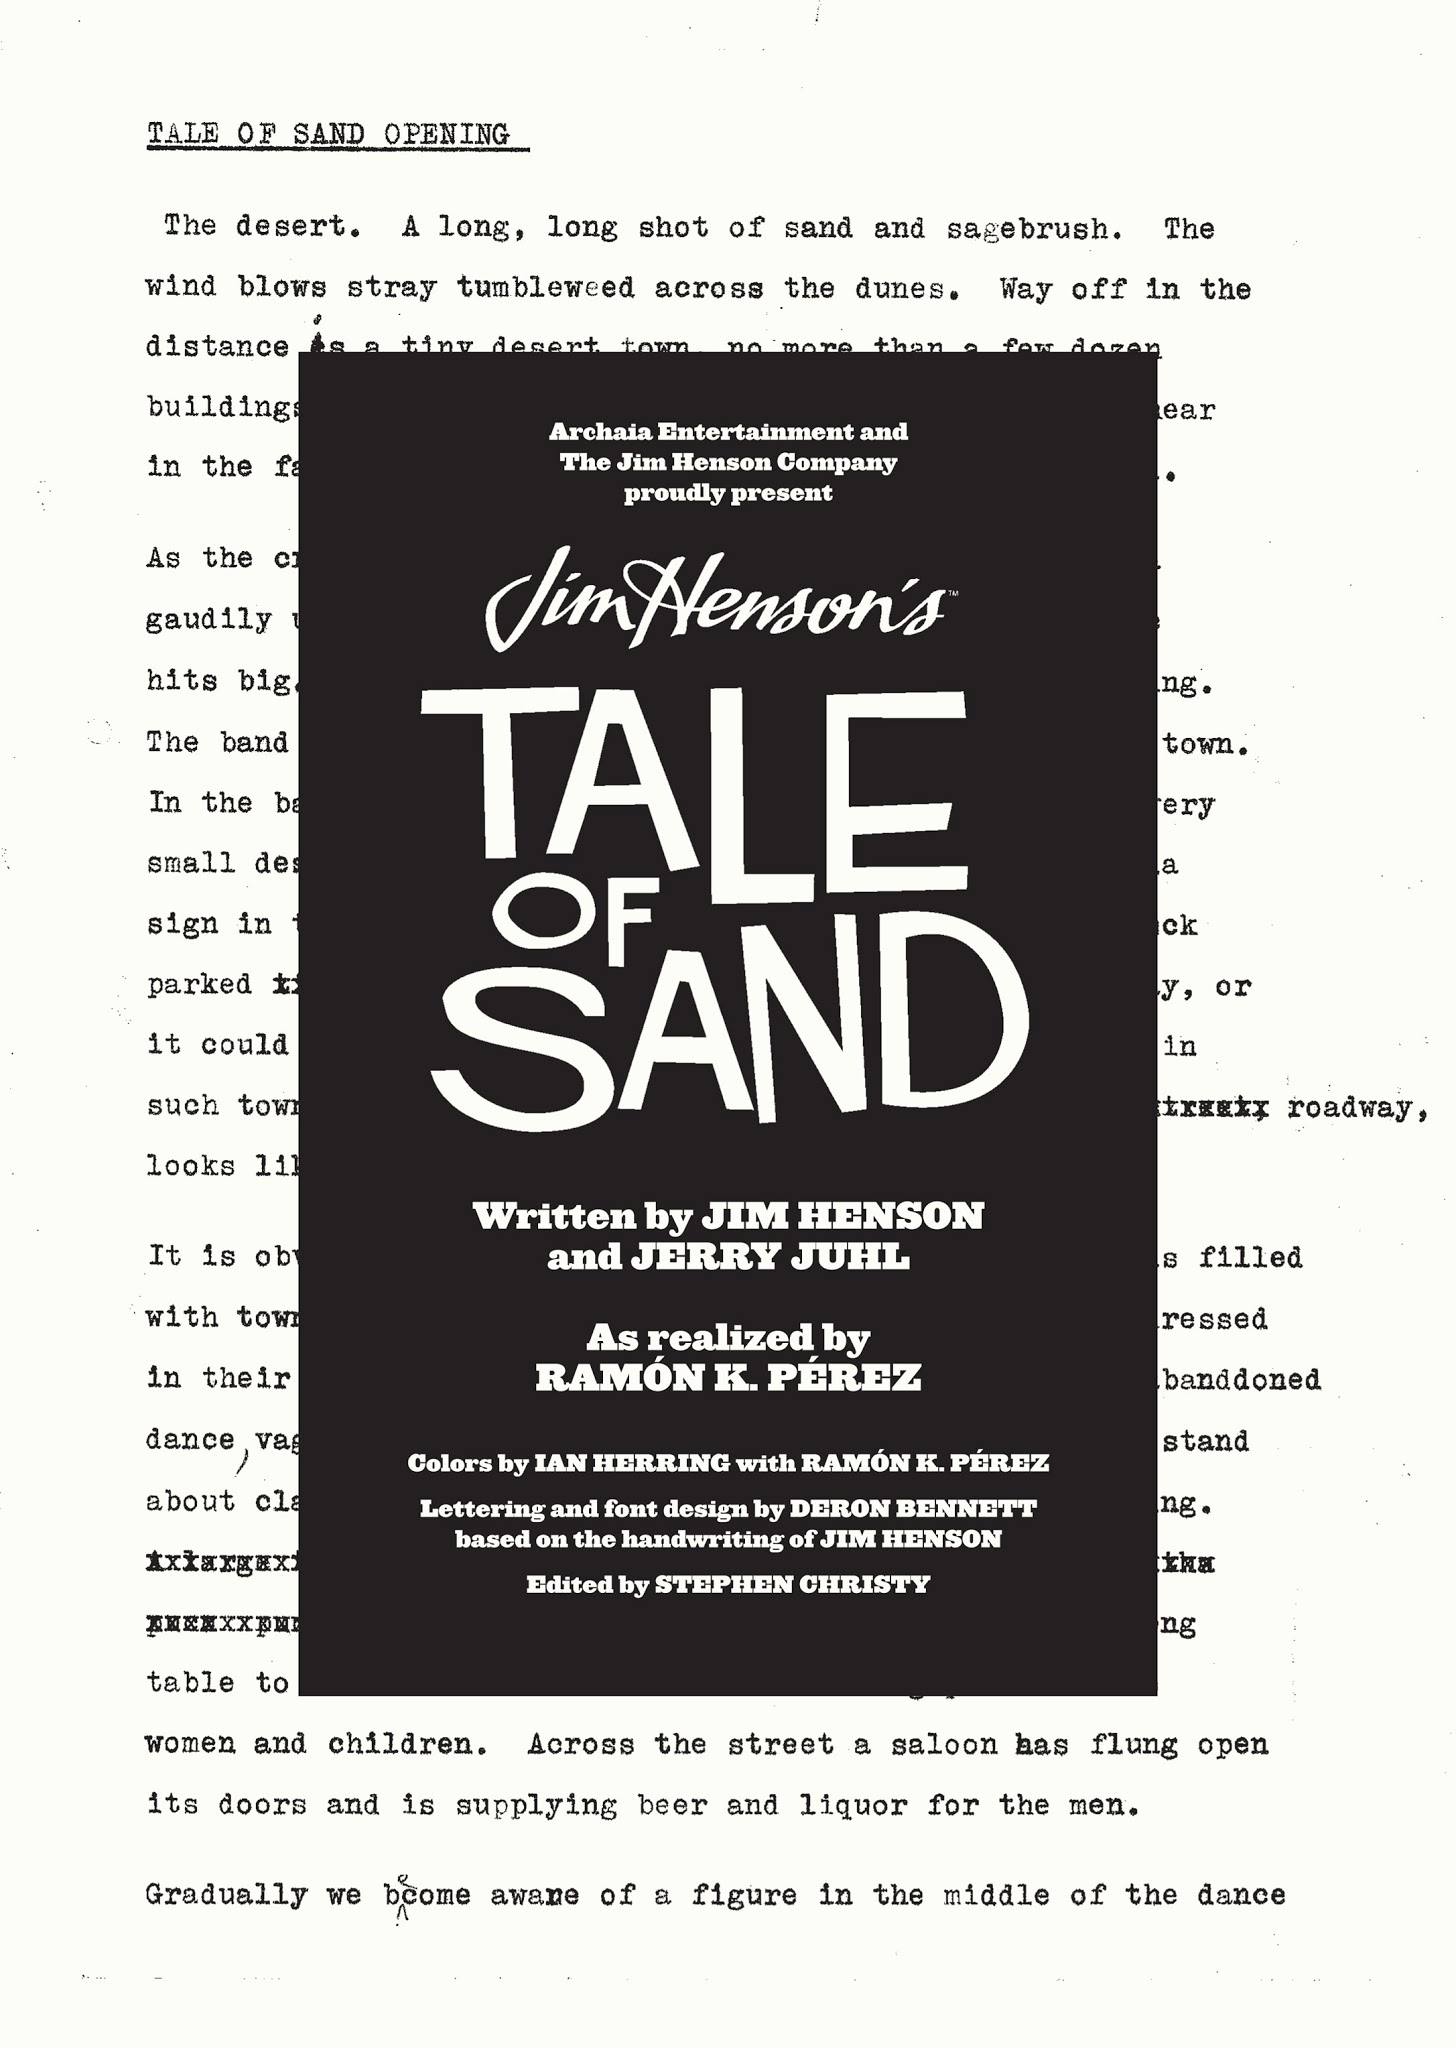 Read online Jim Henson's Tale of Sand comic -  Issue # TPB - 4